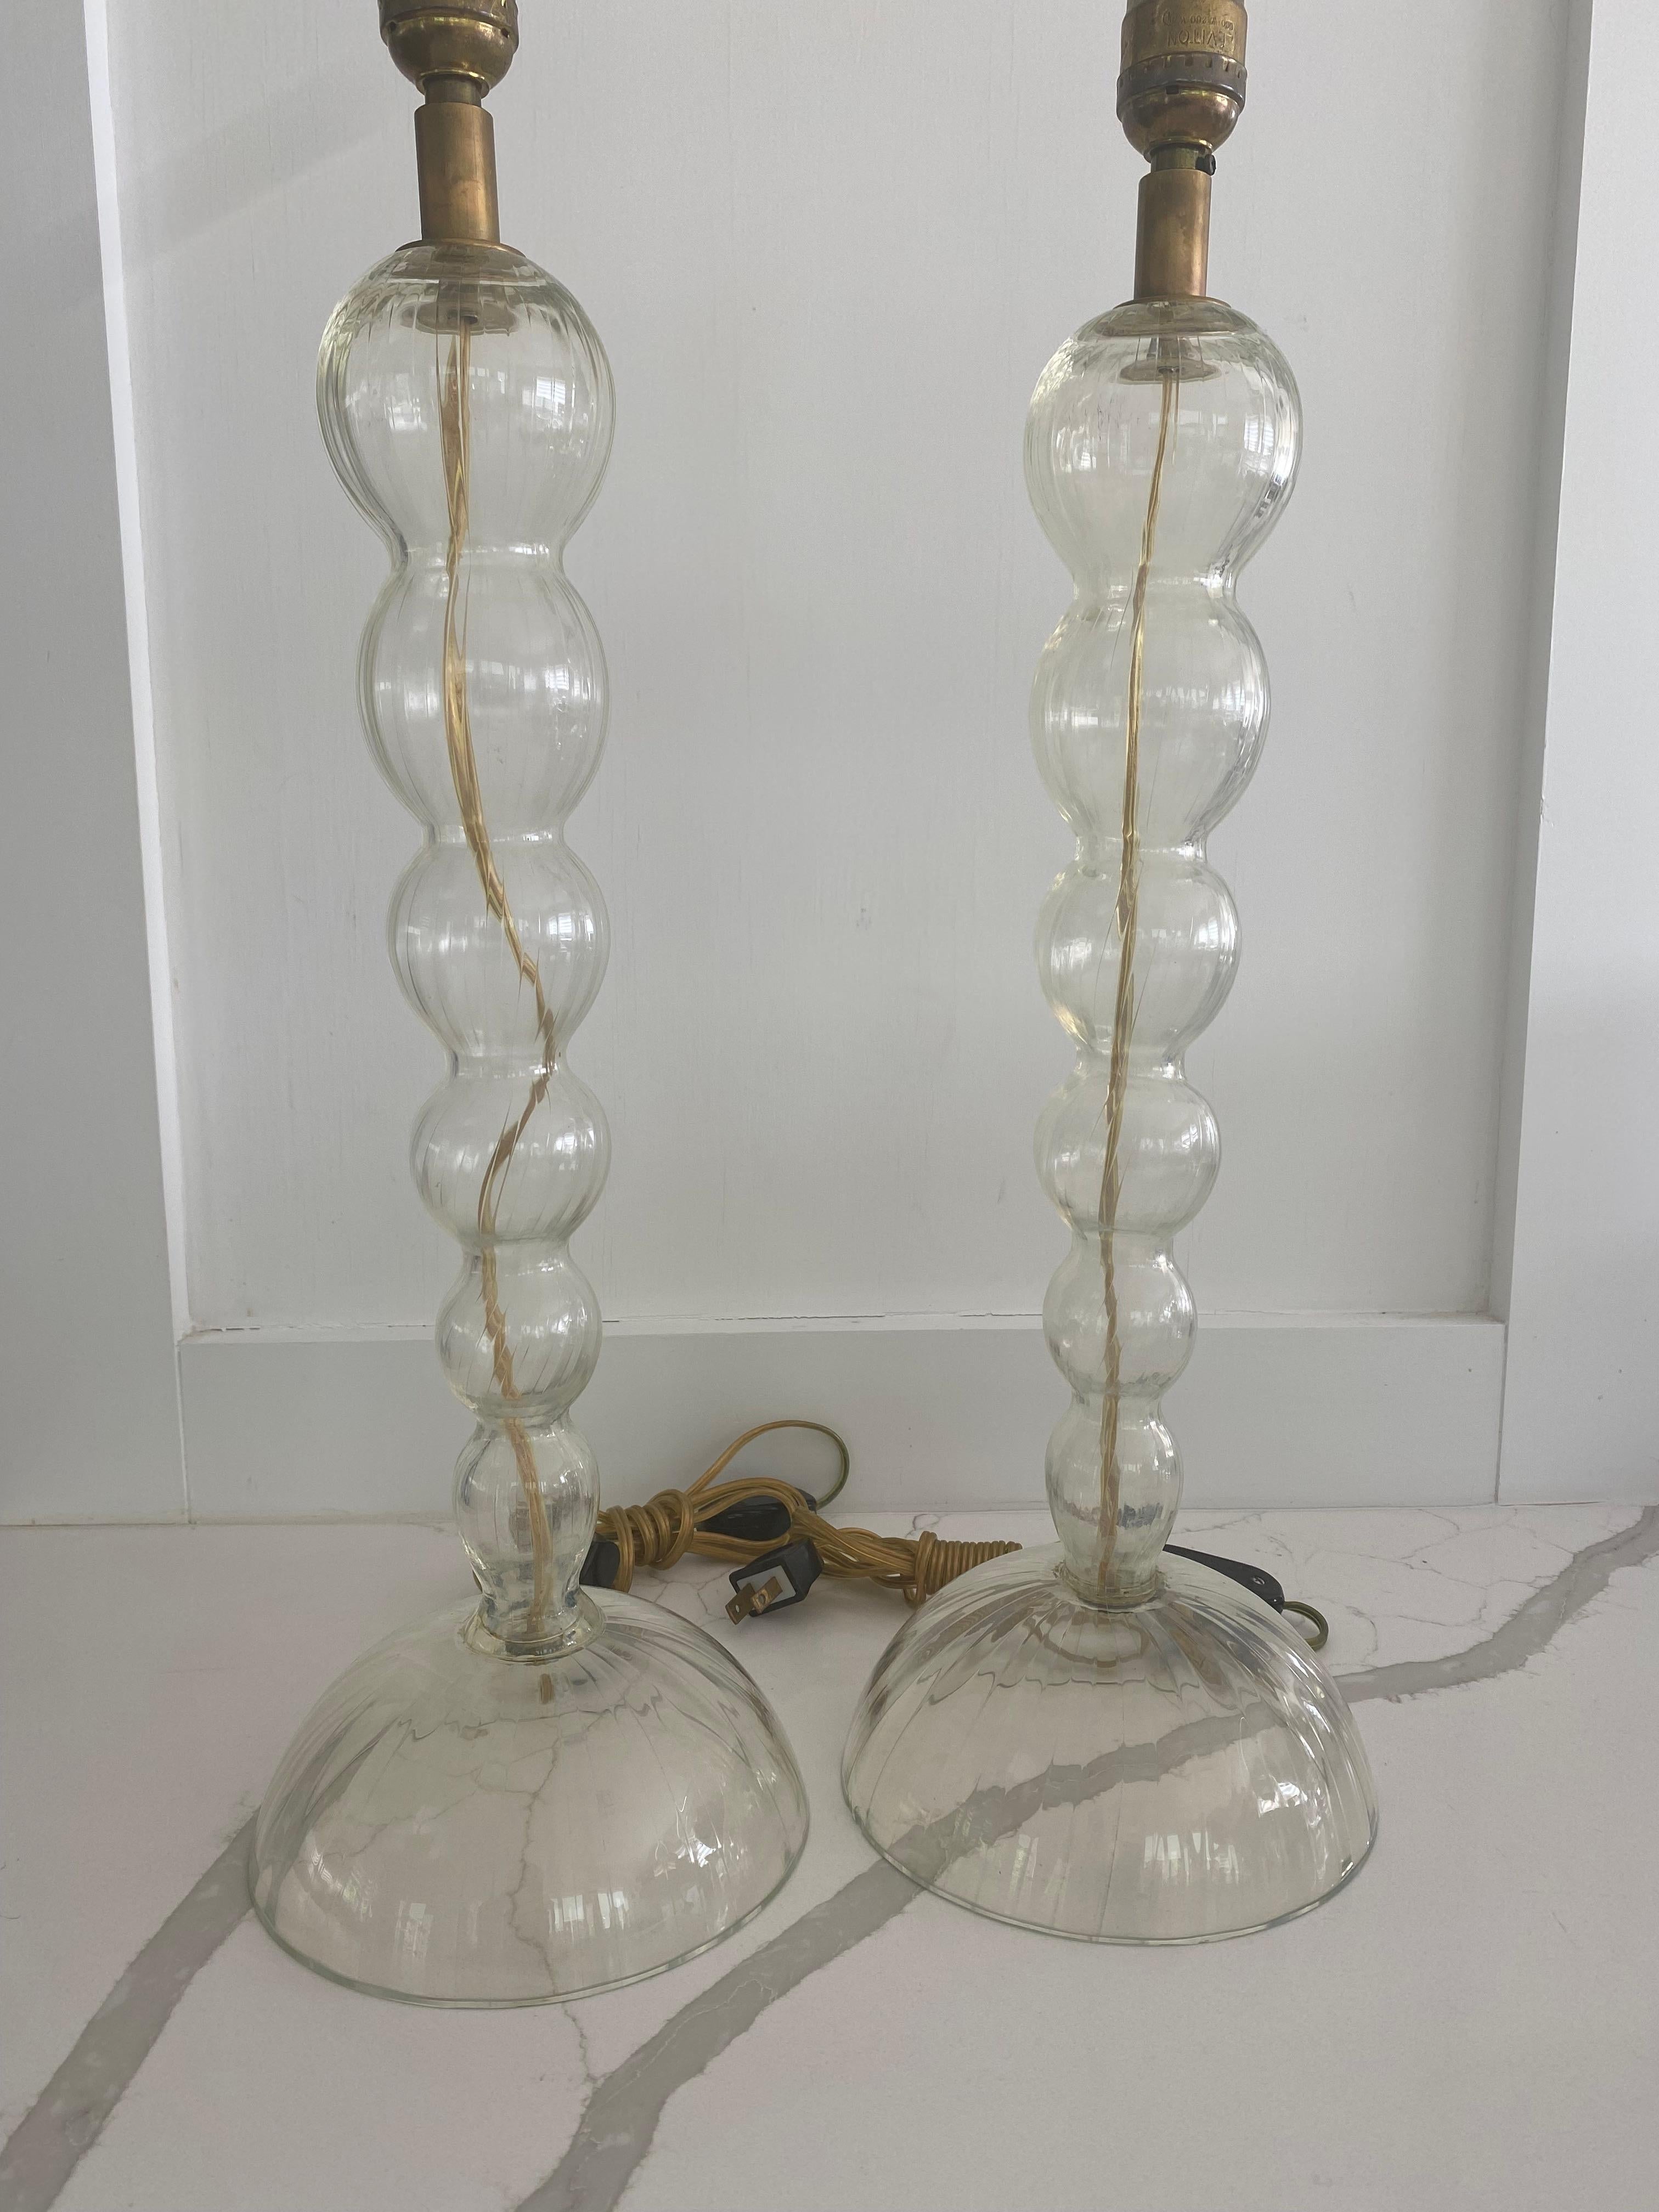 John Hutton design for Donghia from the 1990s
Murana Italy glass table lamp
Etched 